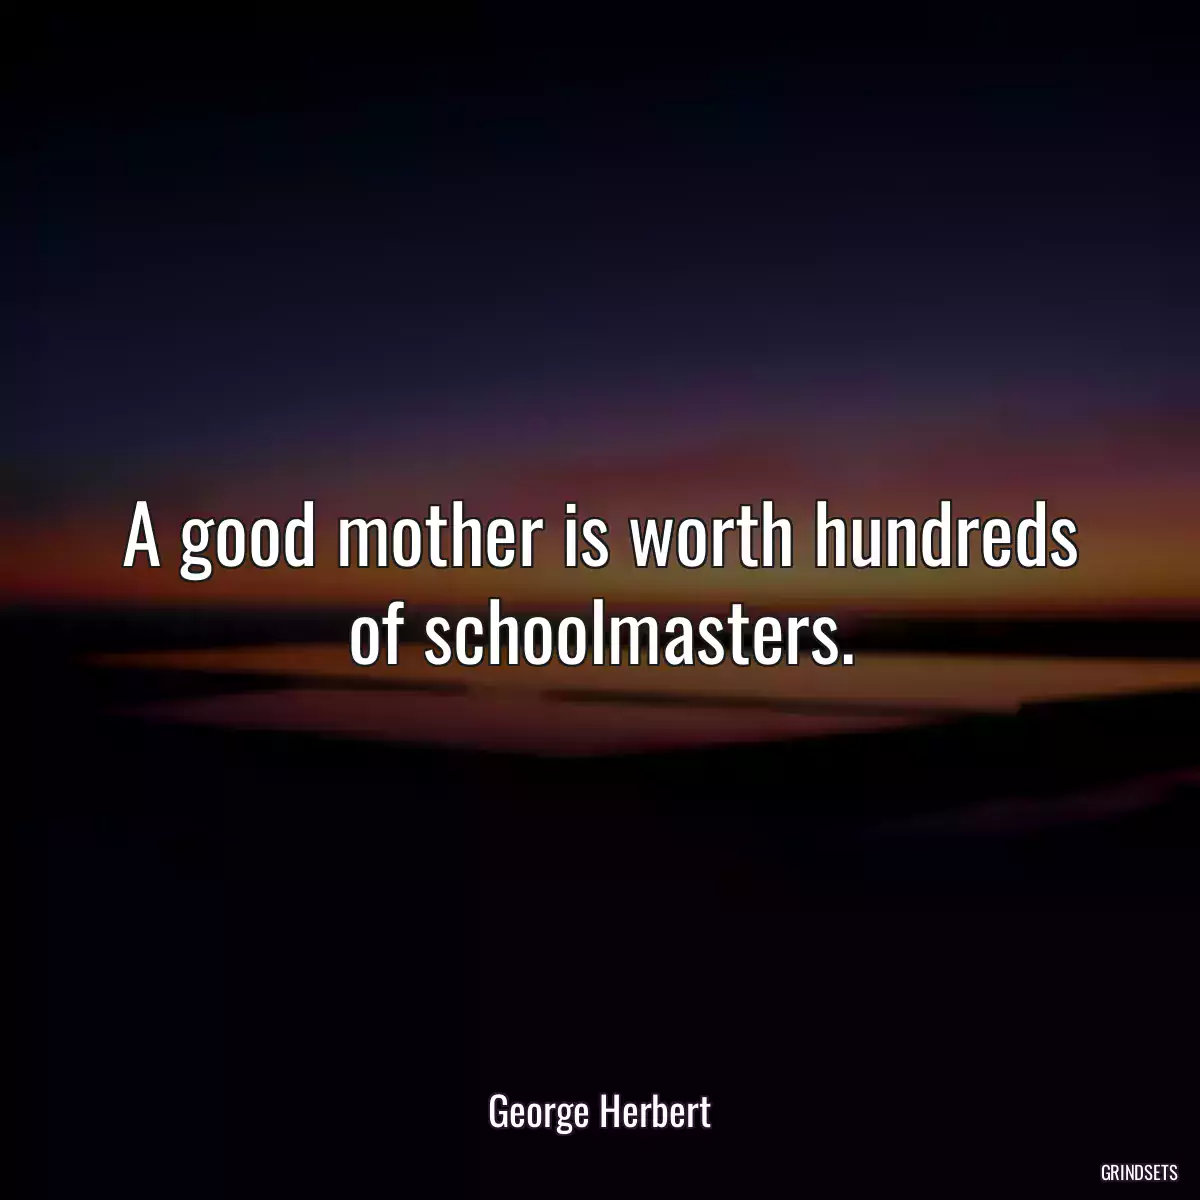 A good mother is worth hundreds of schoolmasters.